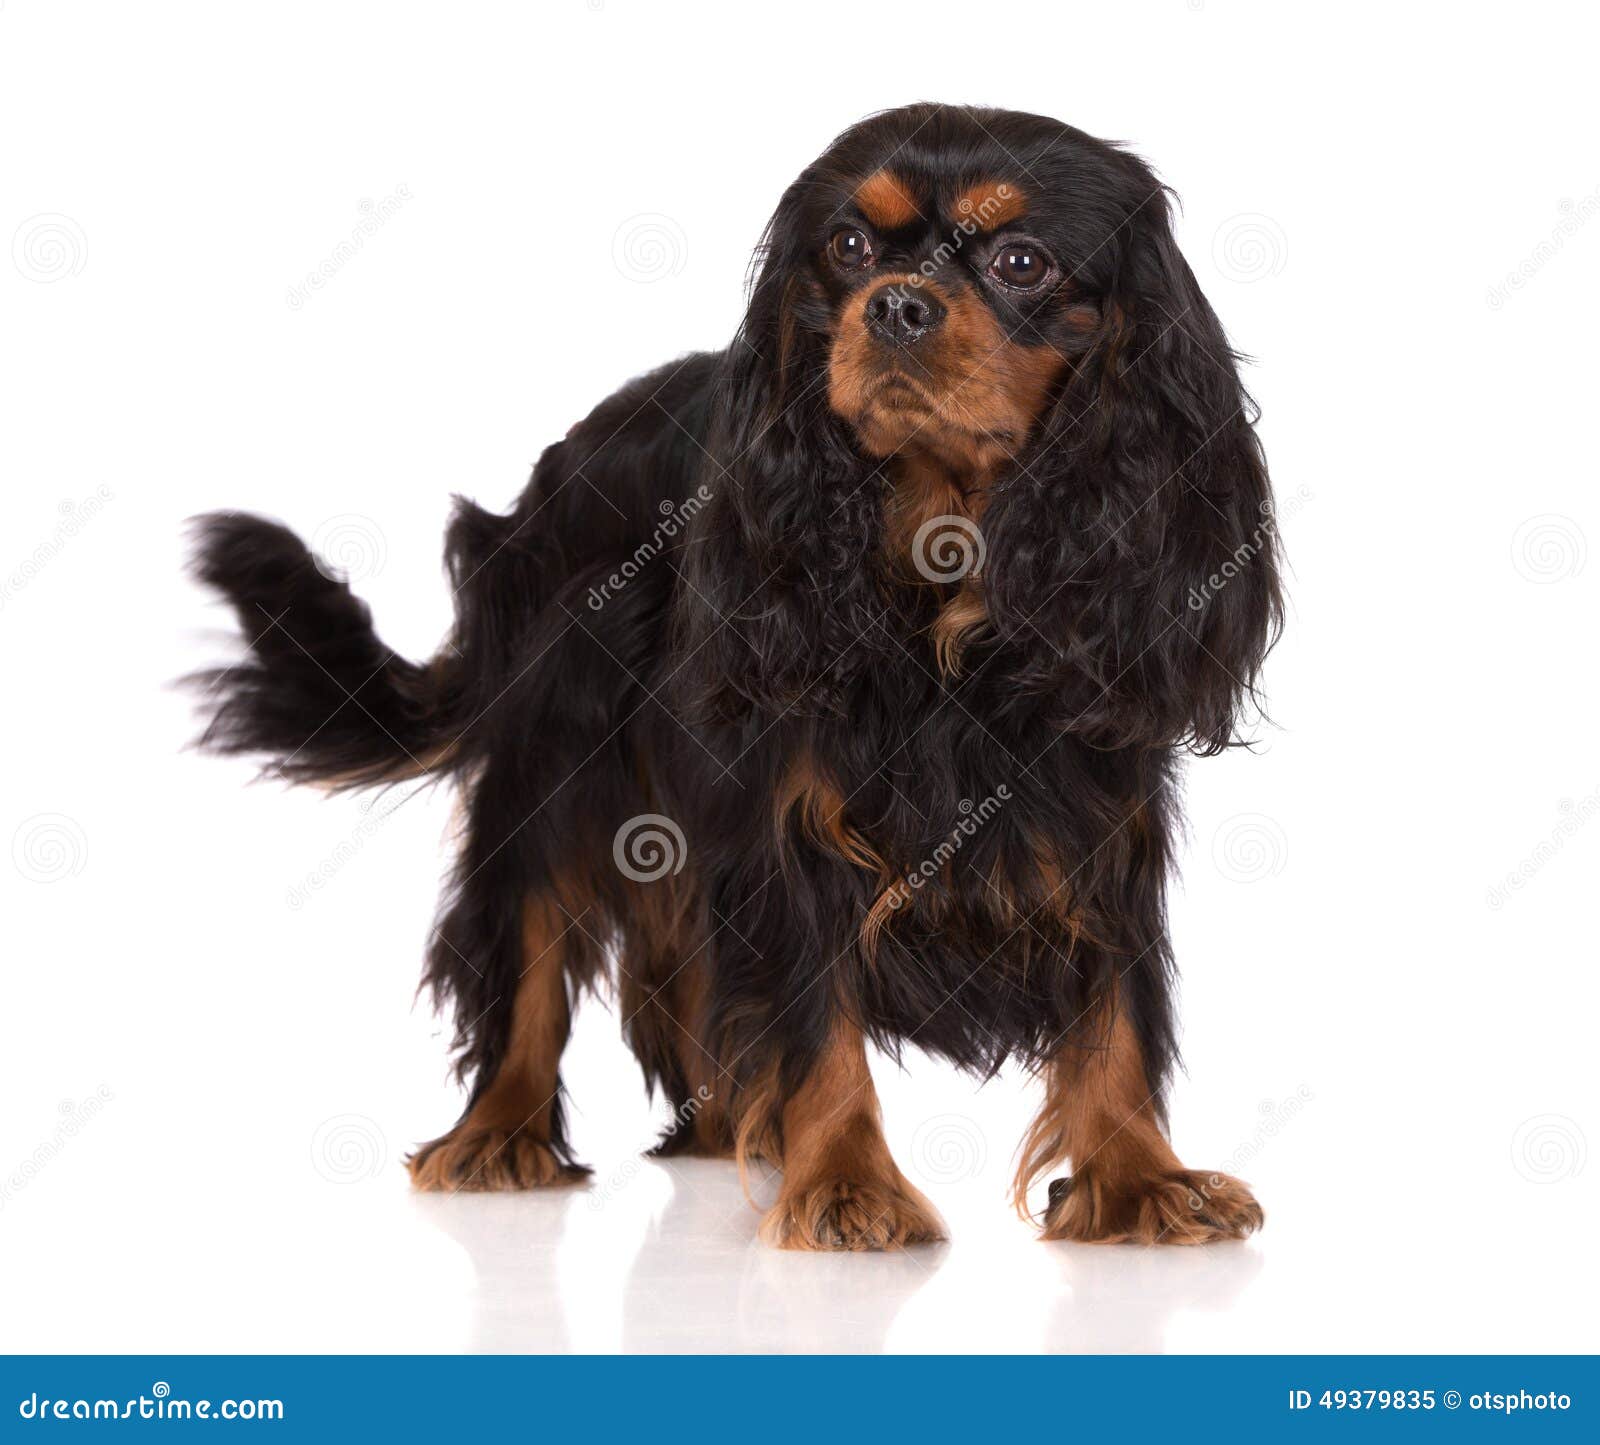 Adorable Black And Tan Cavalier King Charles Spaniel Dog Stock Image Image Of Alert Canine 49379835